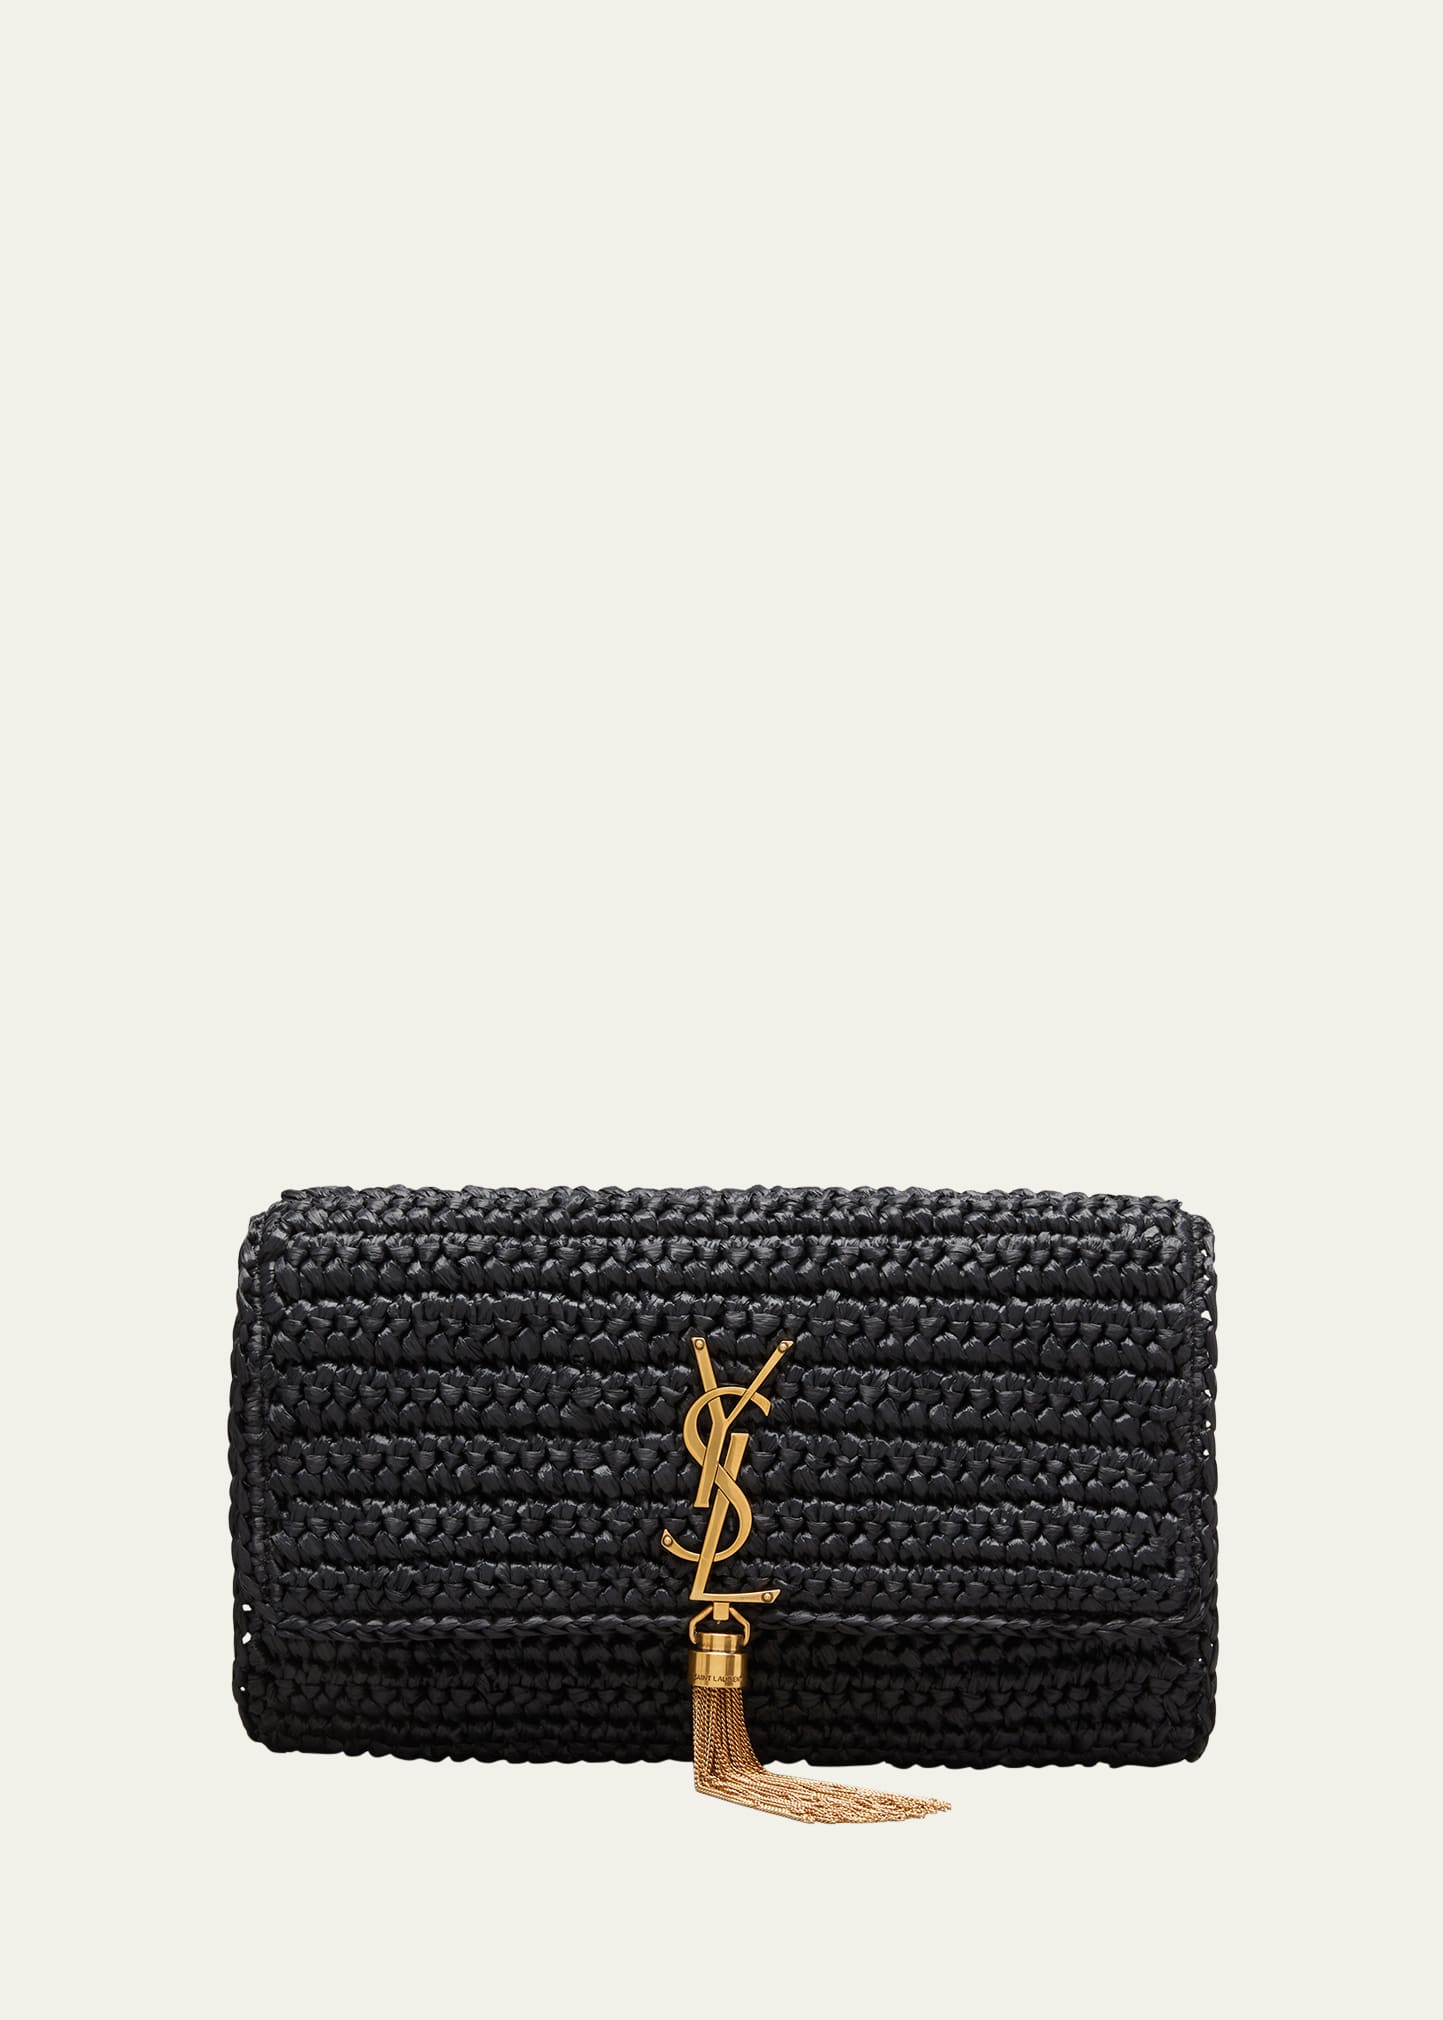 Unboxing the YSL Kate 99 handbag in raffia. This is the perfect summer